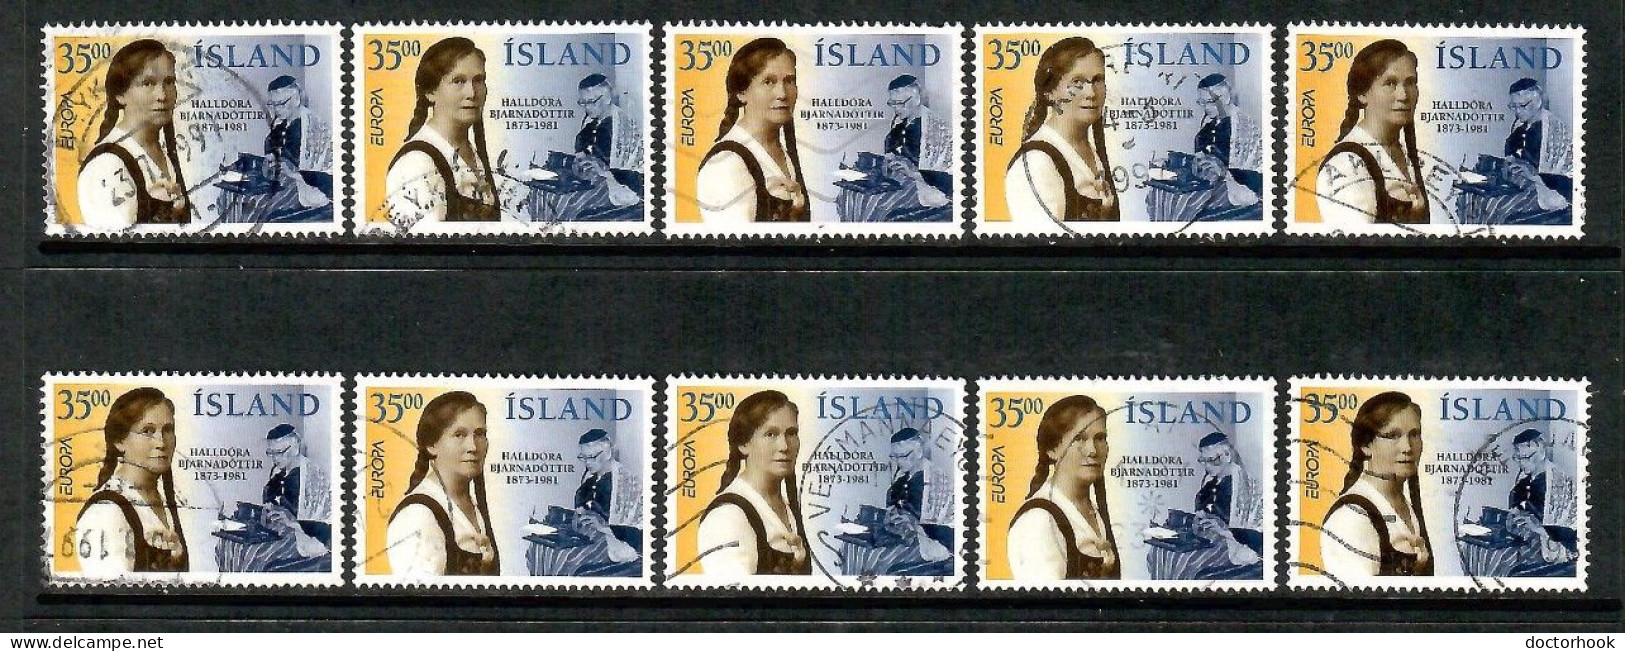 ICELAND   Scott # 818 USED WHOLESALE LOT OF 10 (CONDITION AS PER SCAN) (WH-628) - Collections, Lots & Series